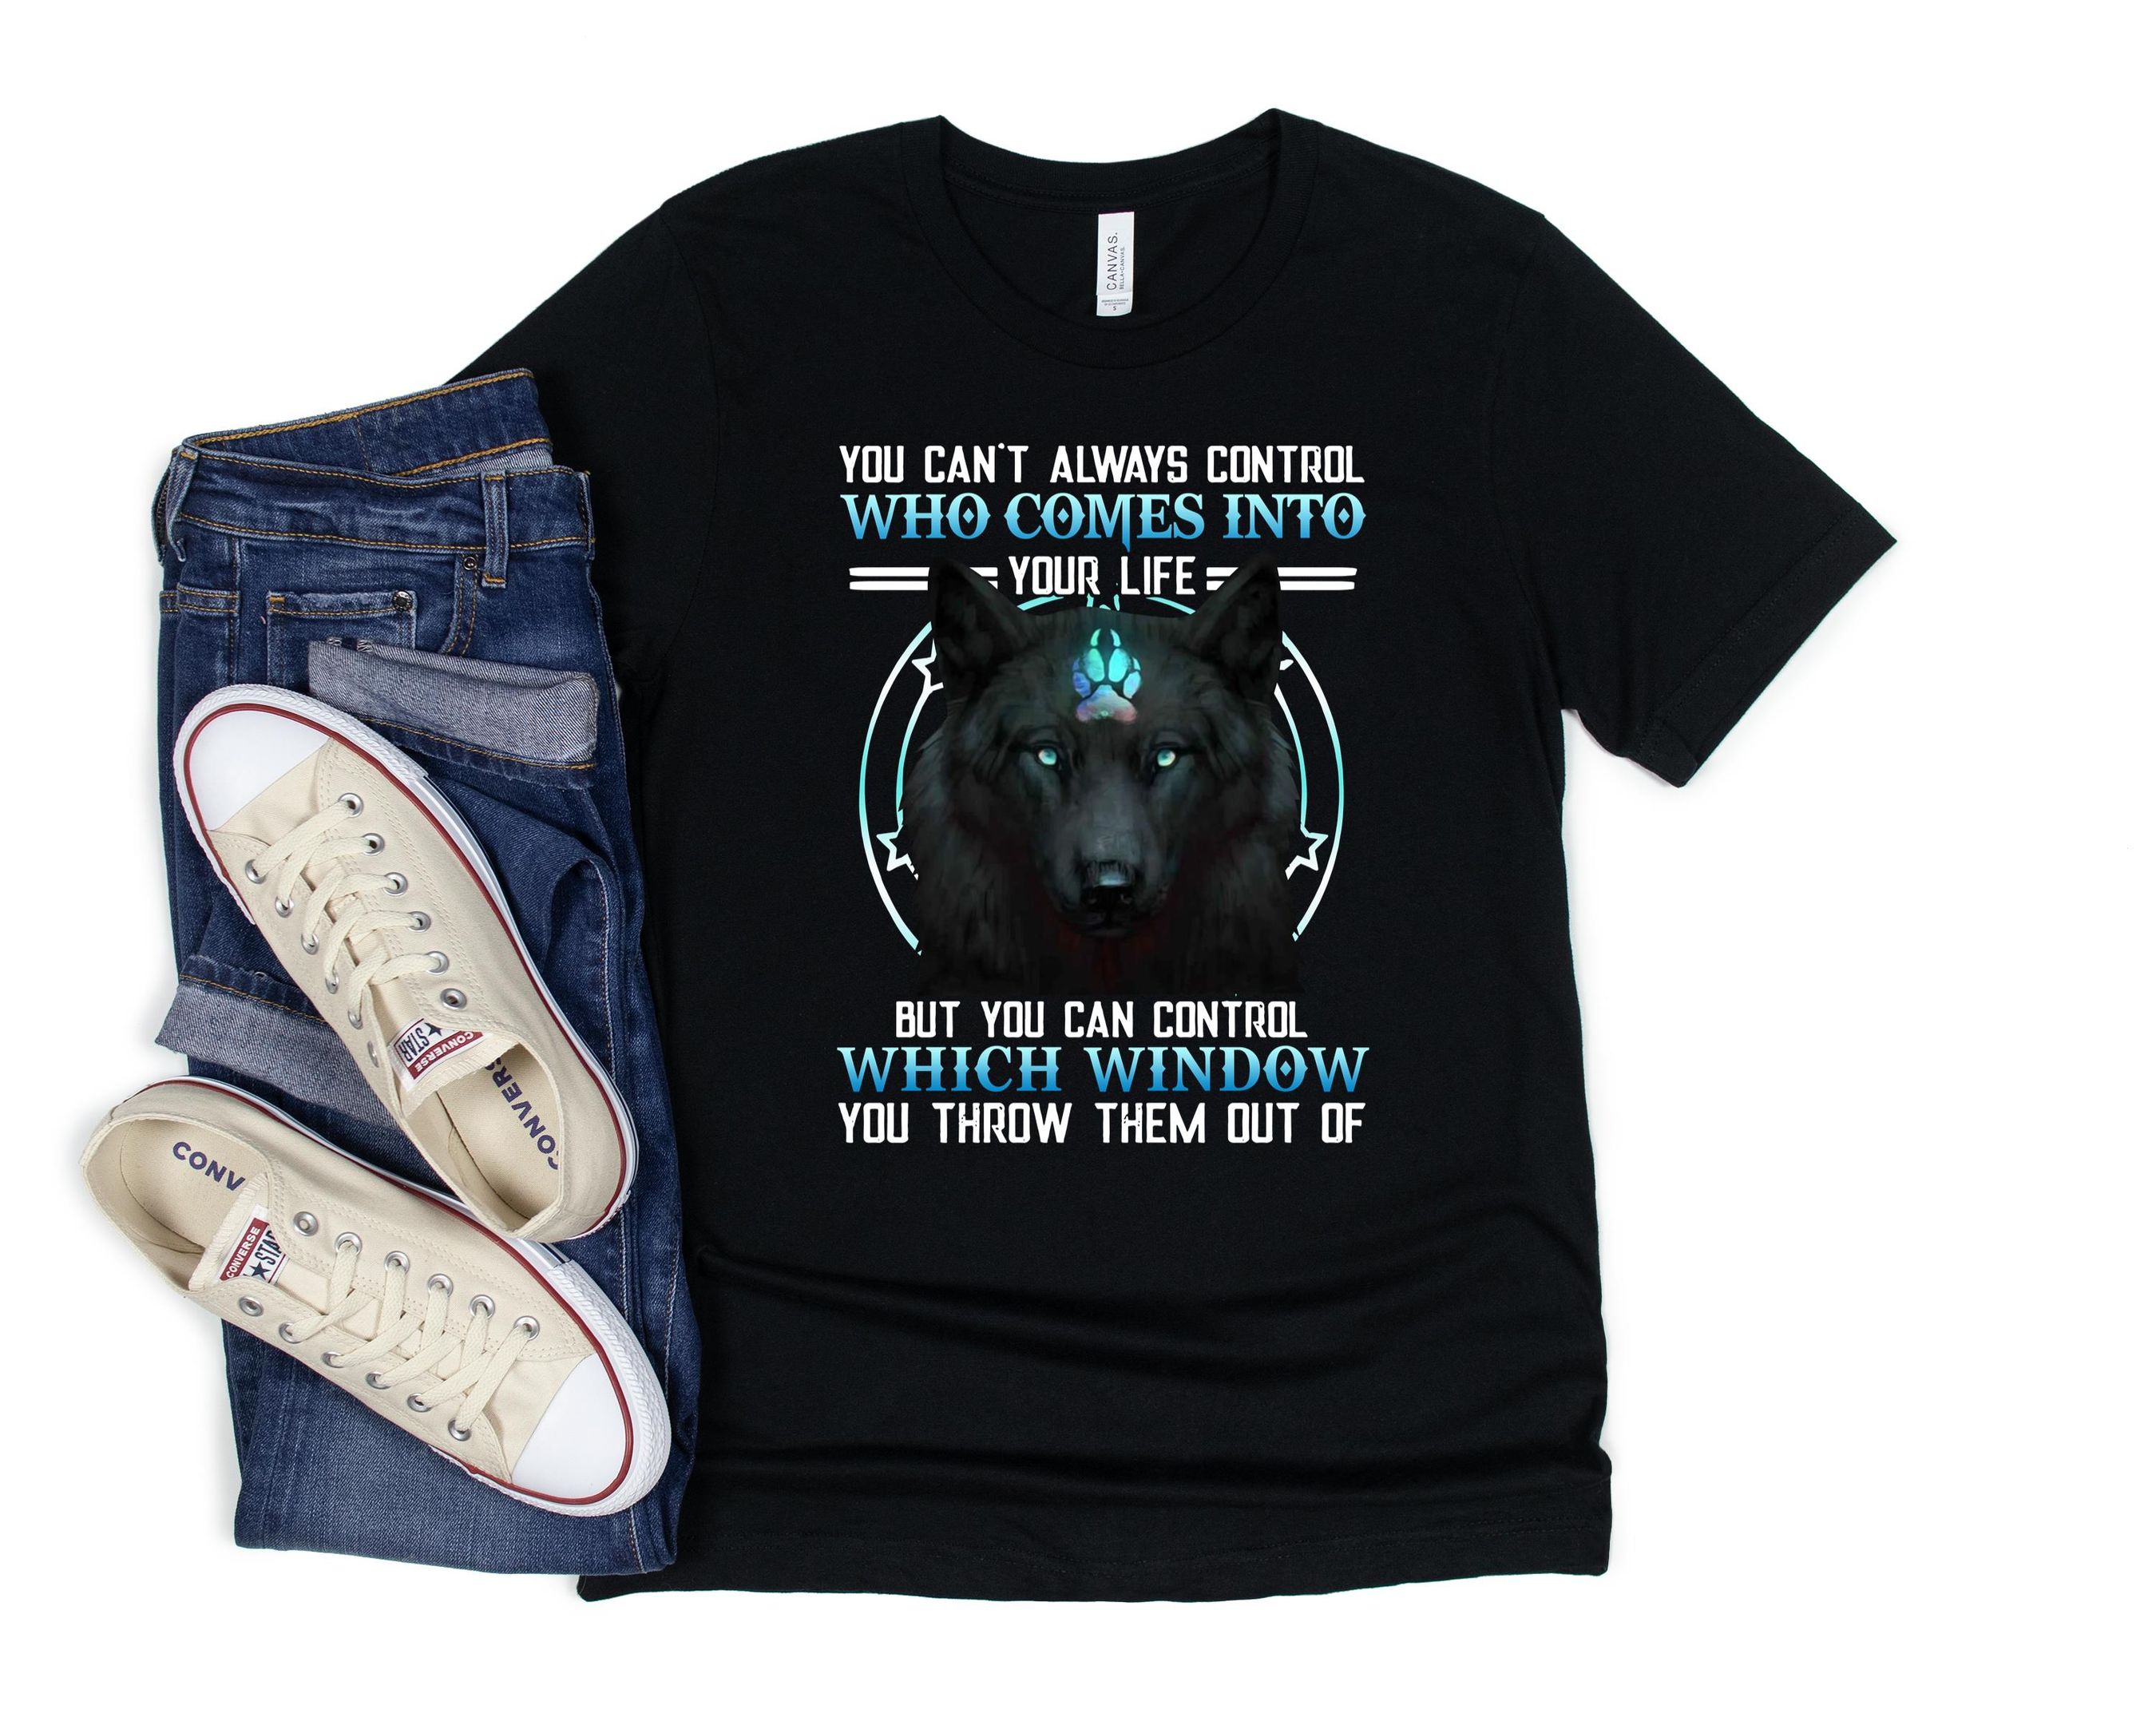 You Can’T Always Control Who Comes Into Your Life Shirt, Native Wolf Shirt, Native Shirt, Indian American Shirt